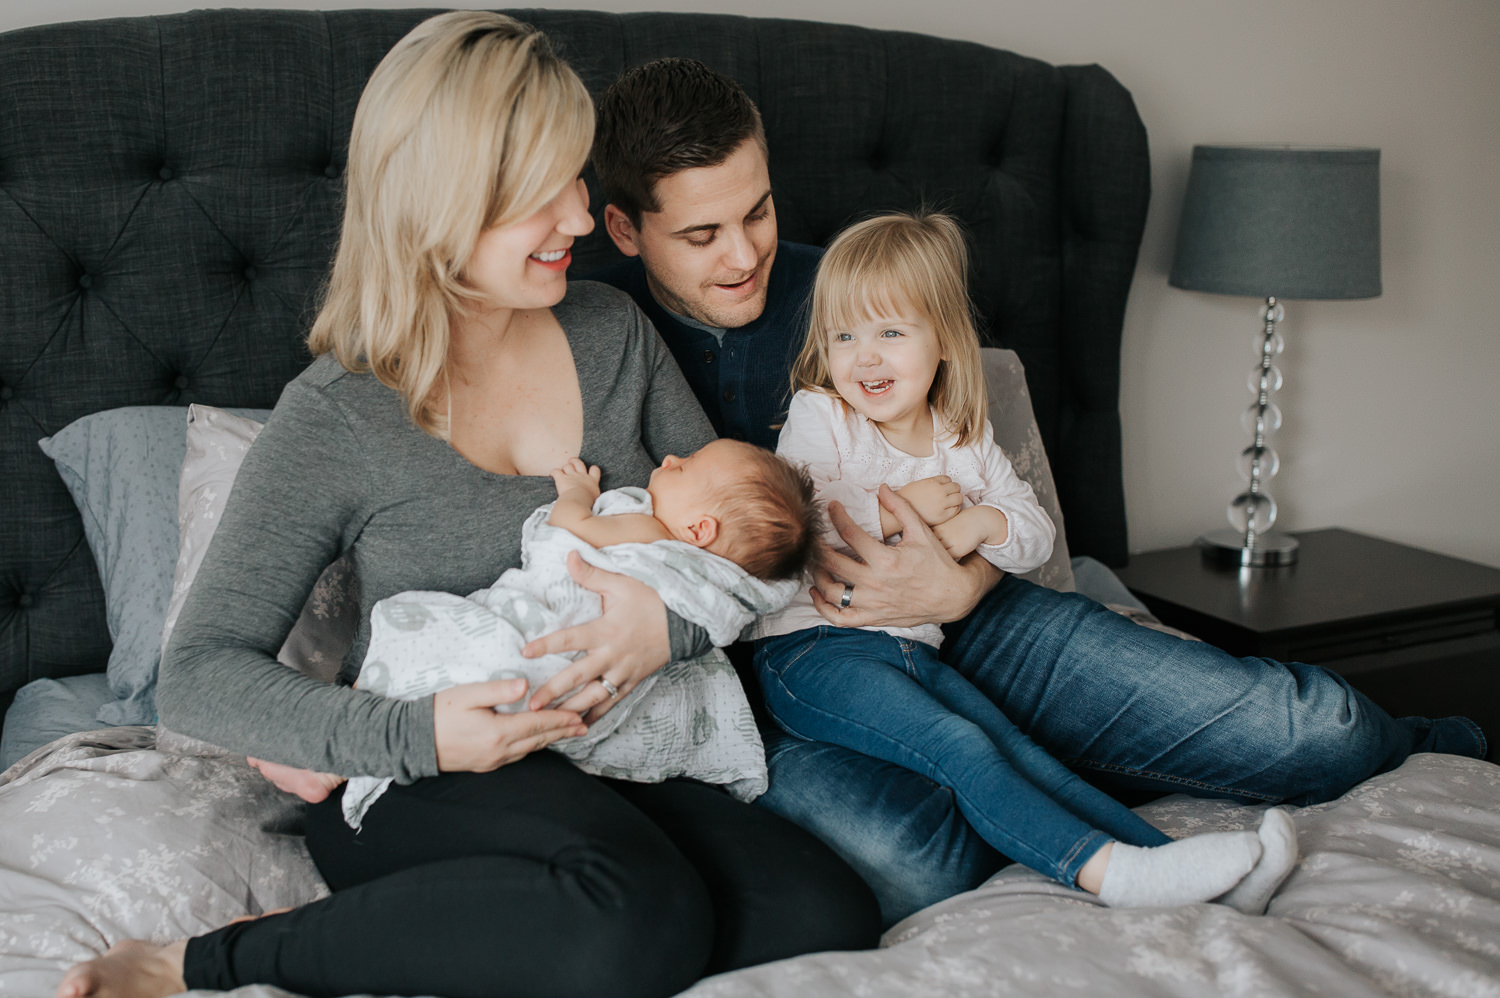  family of four sitting on bed, mom holding 2 week old baby boy 2 year old girl sitting on dad's lap smiling - Markham Lifestyle Photography